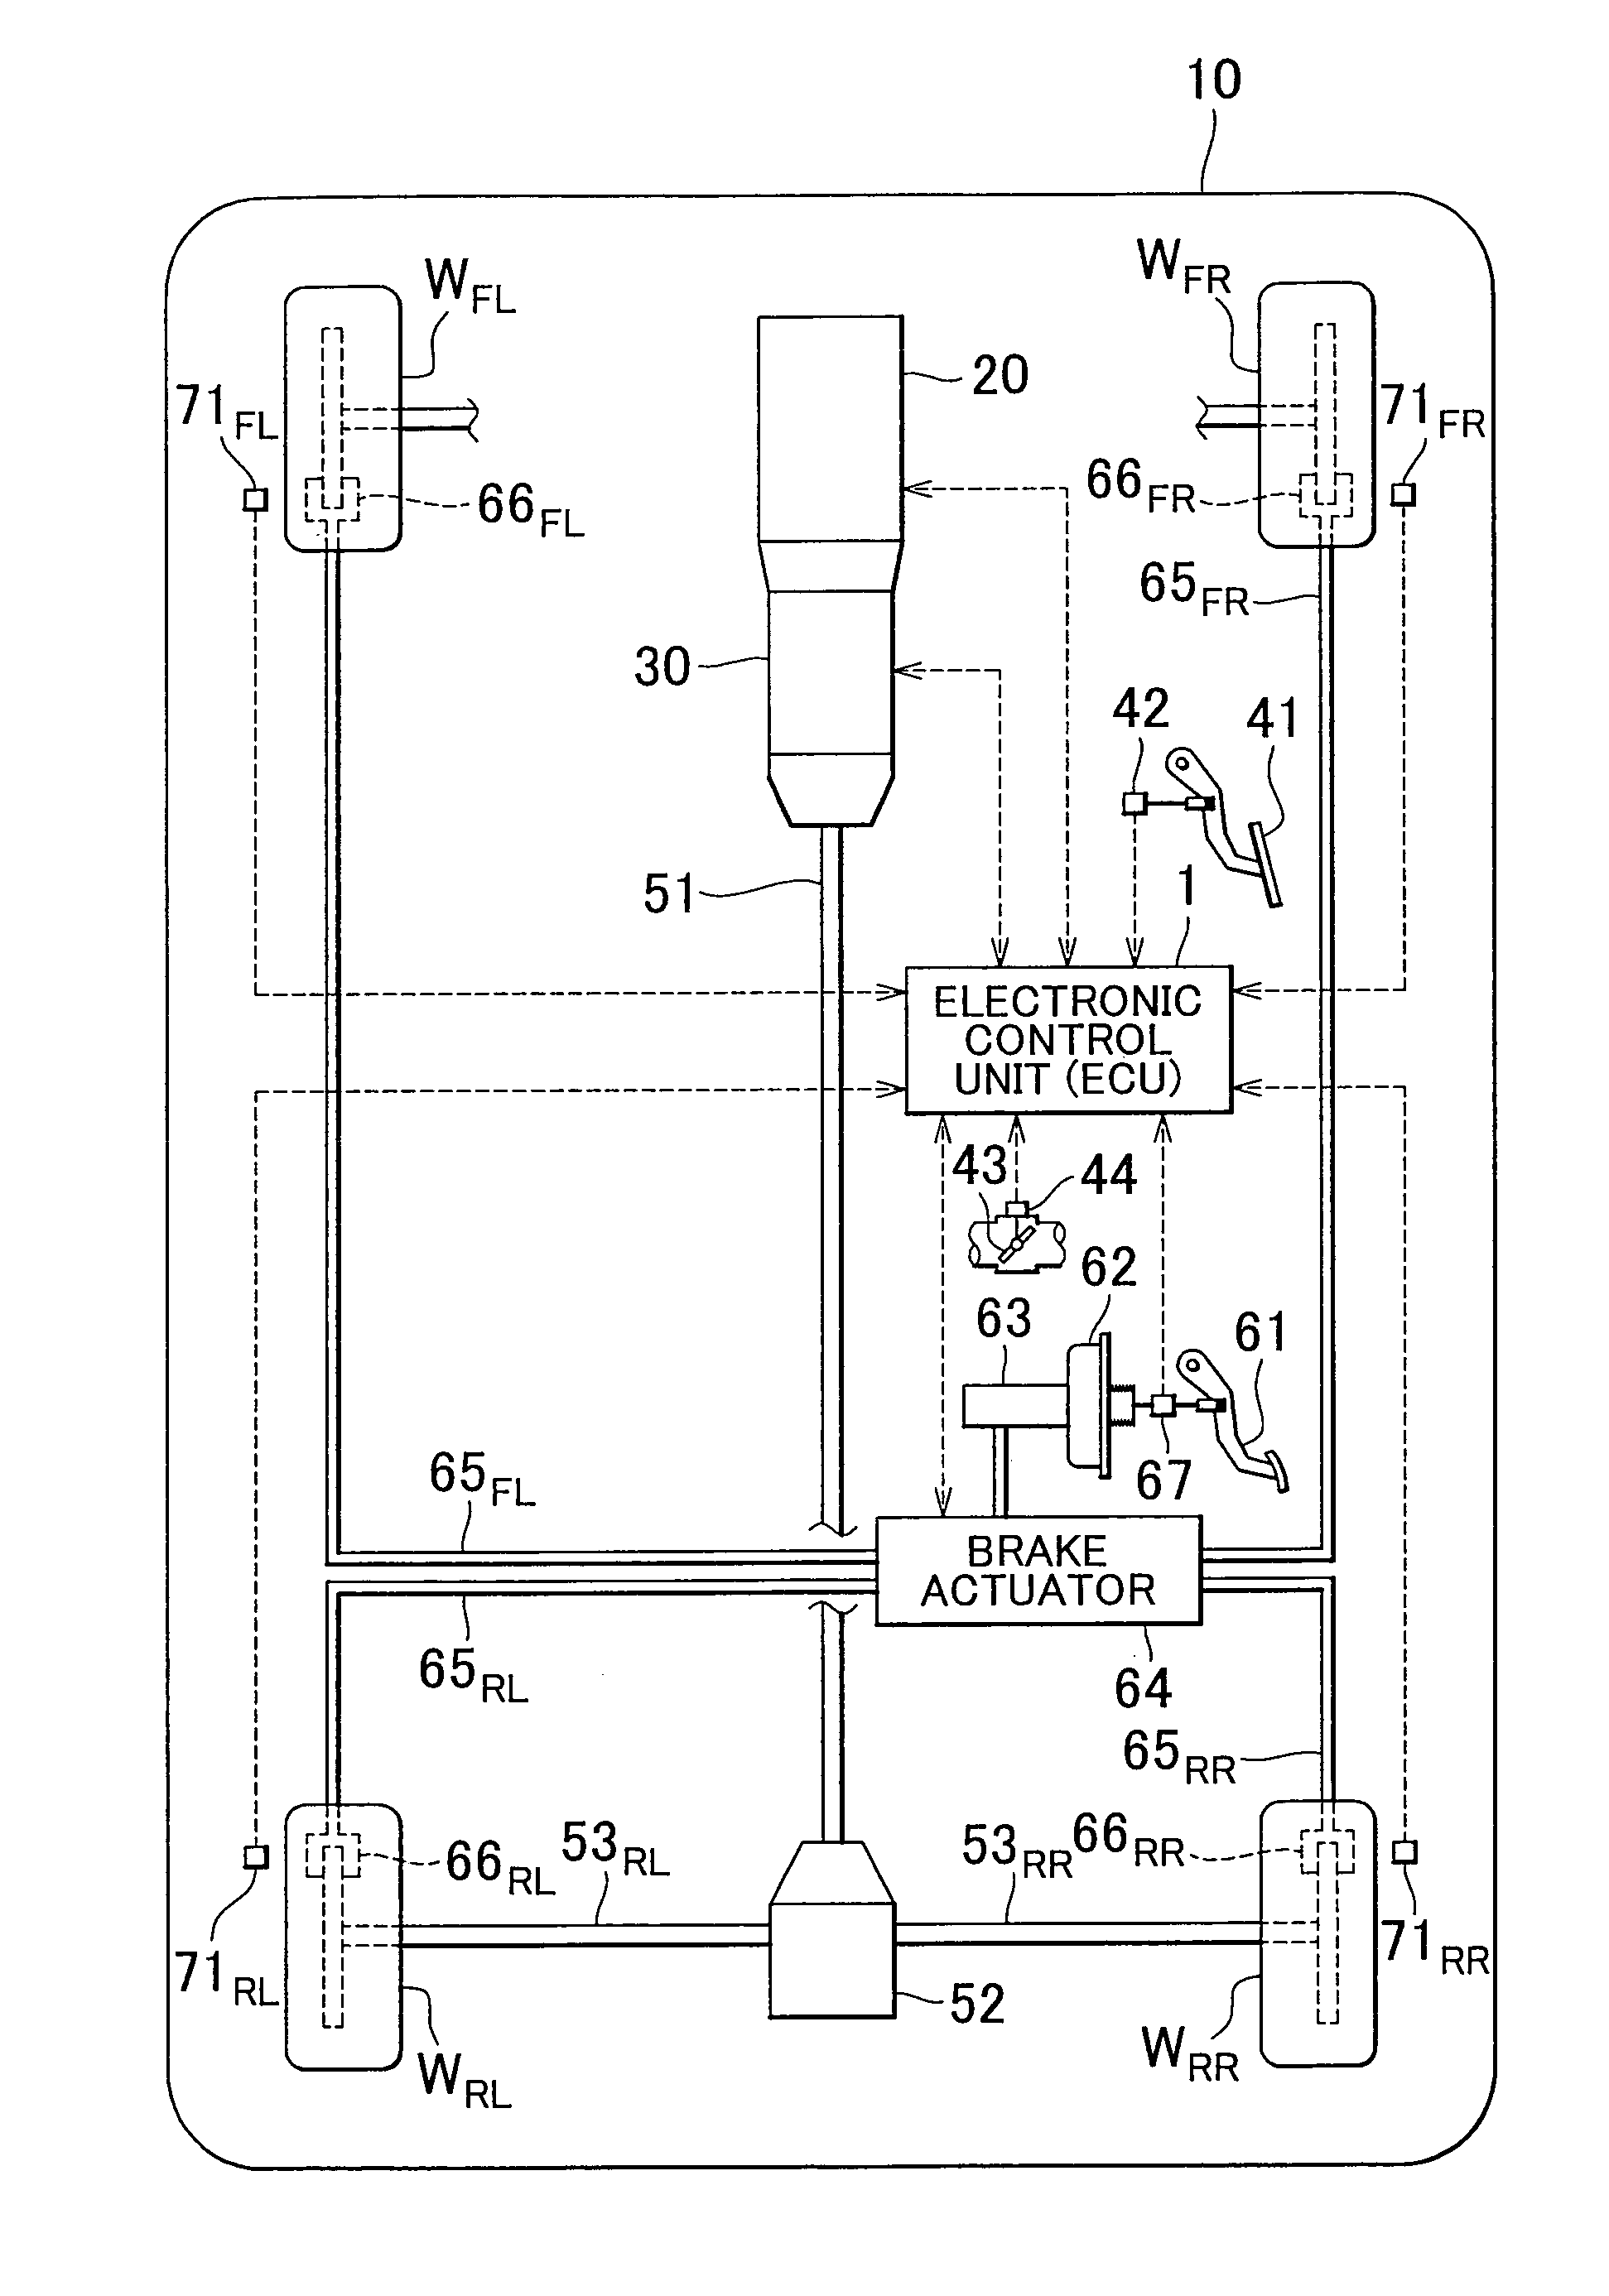 Sprung mass damping control system of vehicle